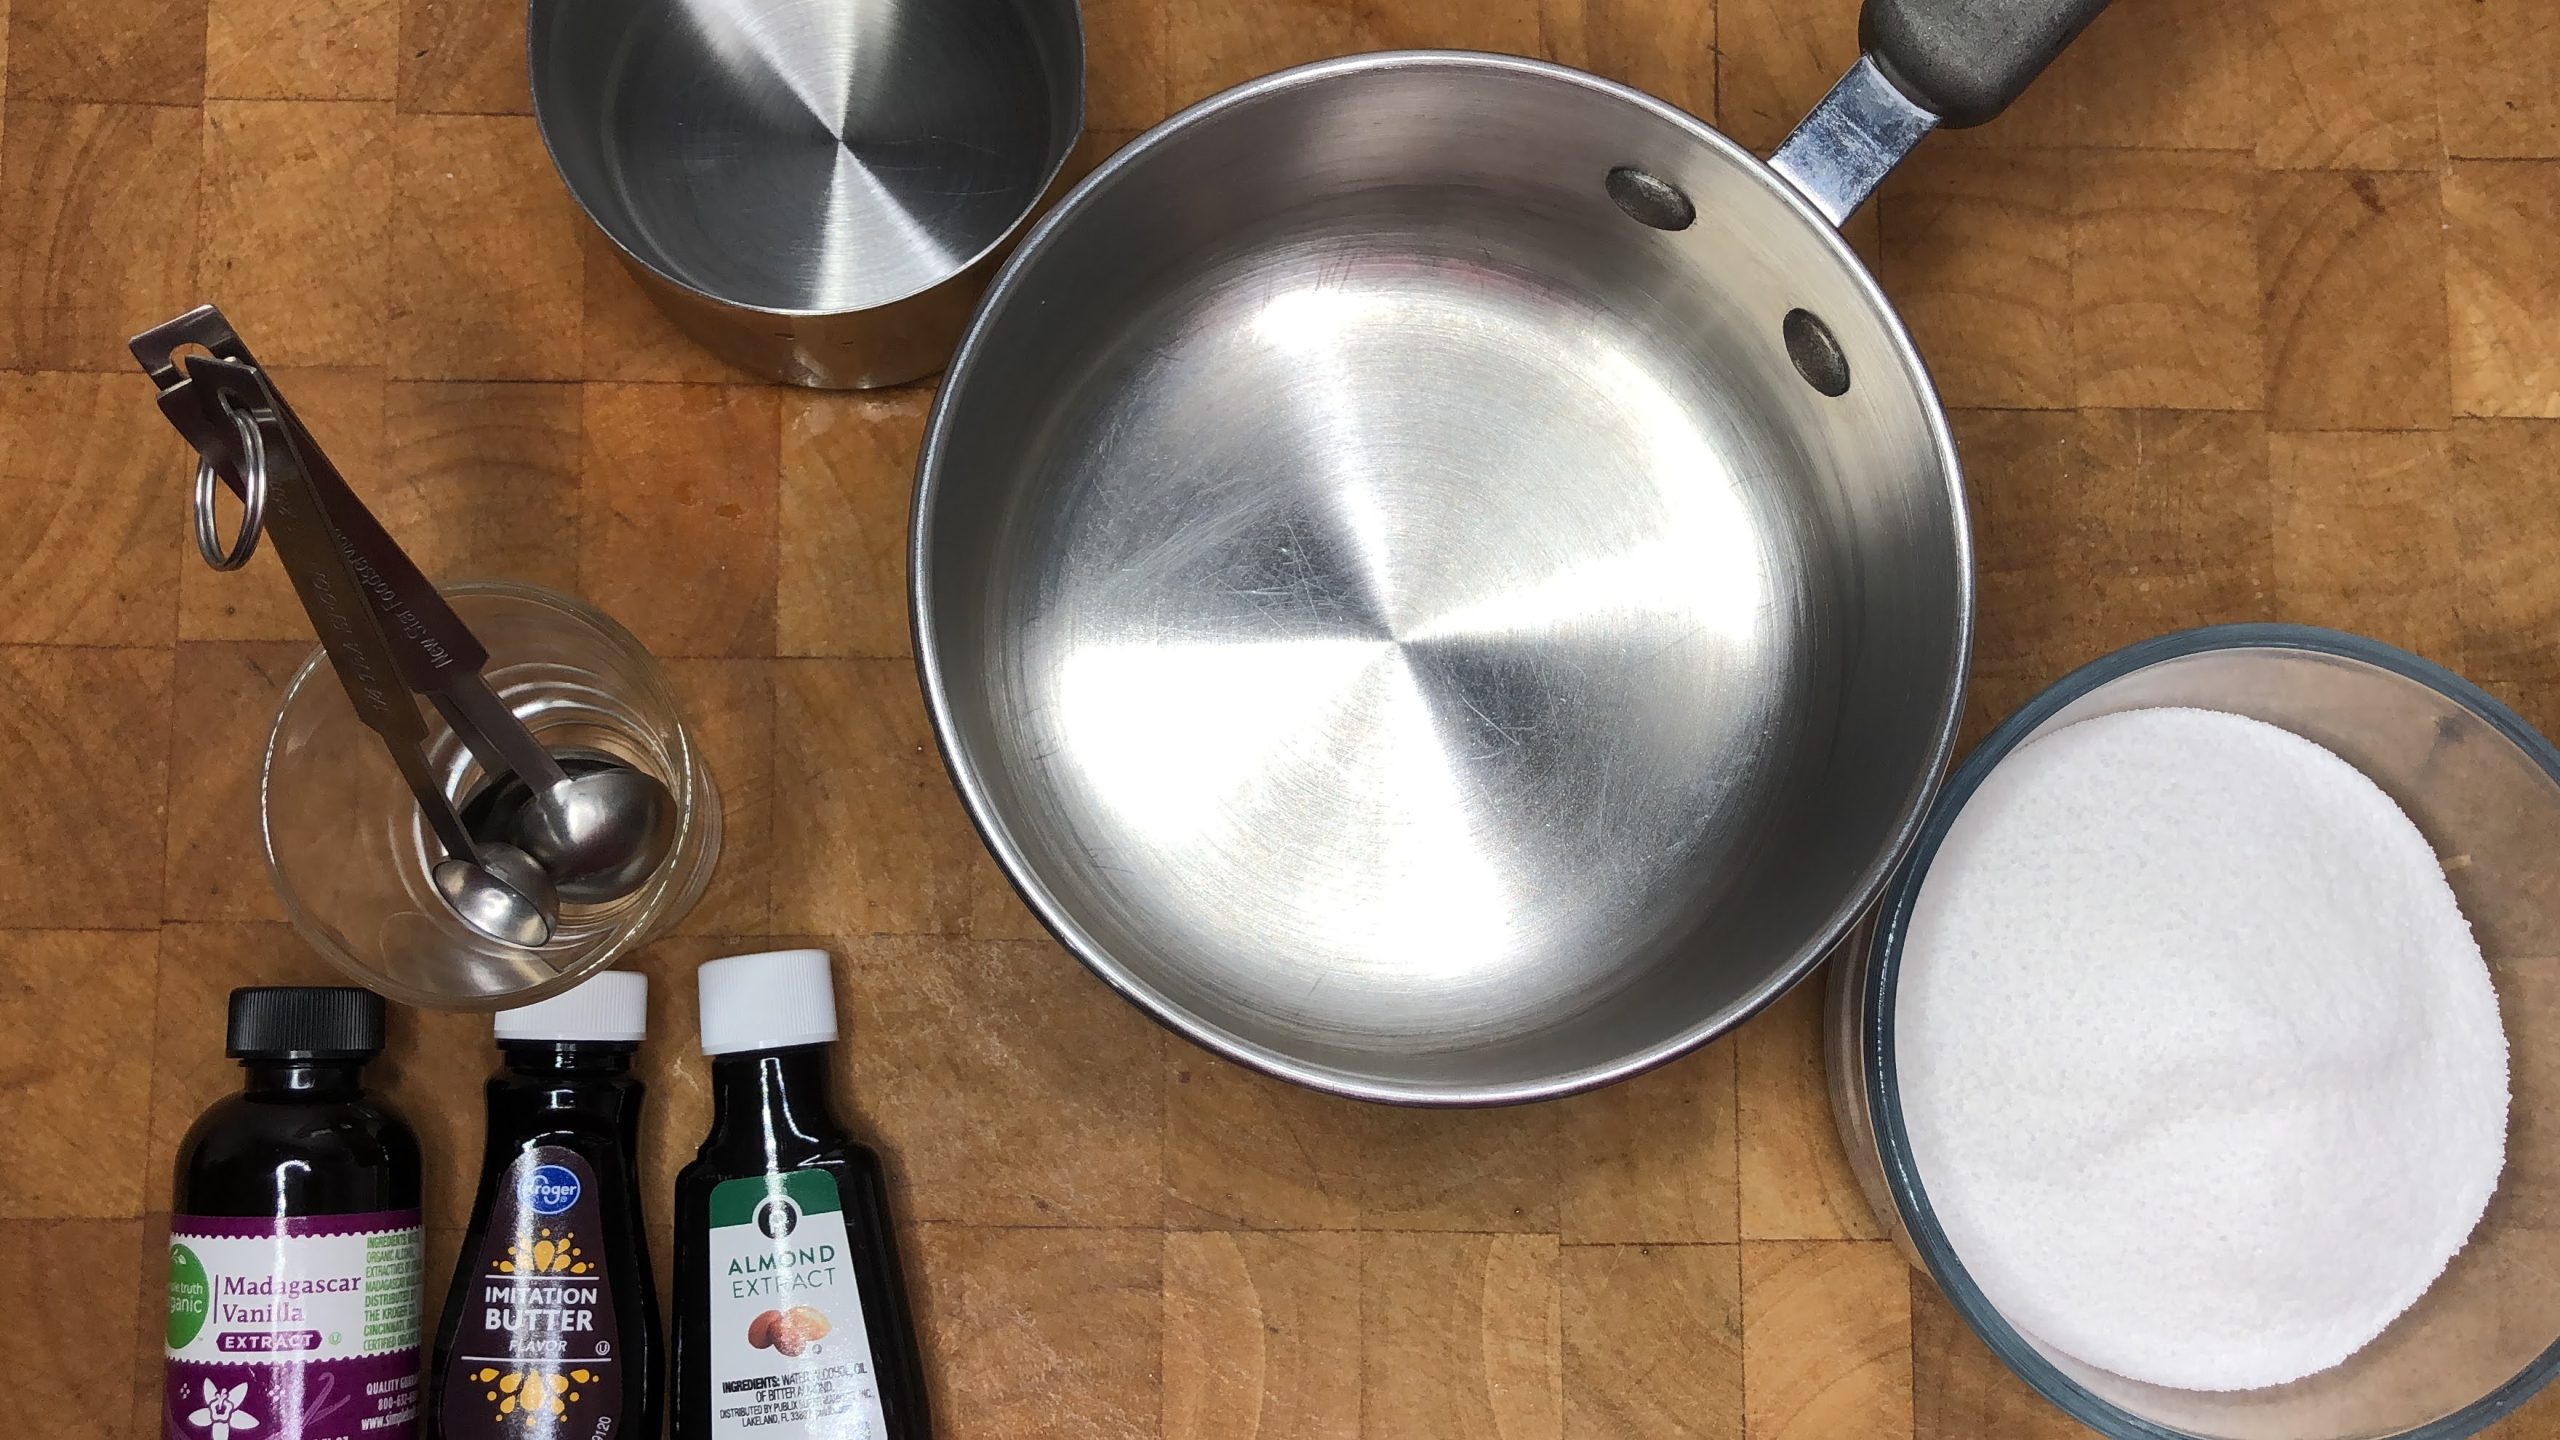 Bowls of sugar and water as well as vanilla, butter and almond extract next to a saucepan.